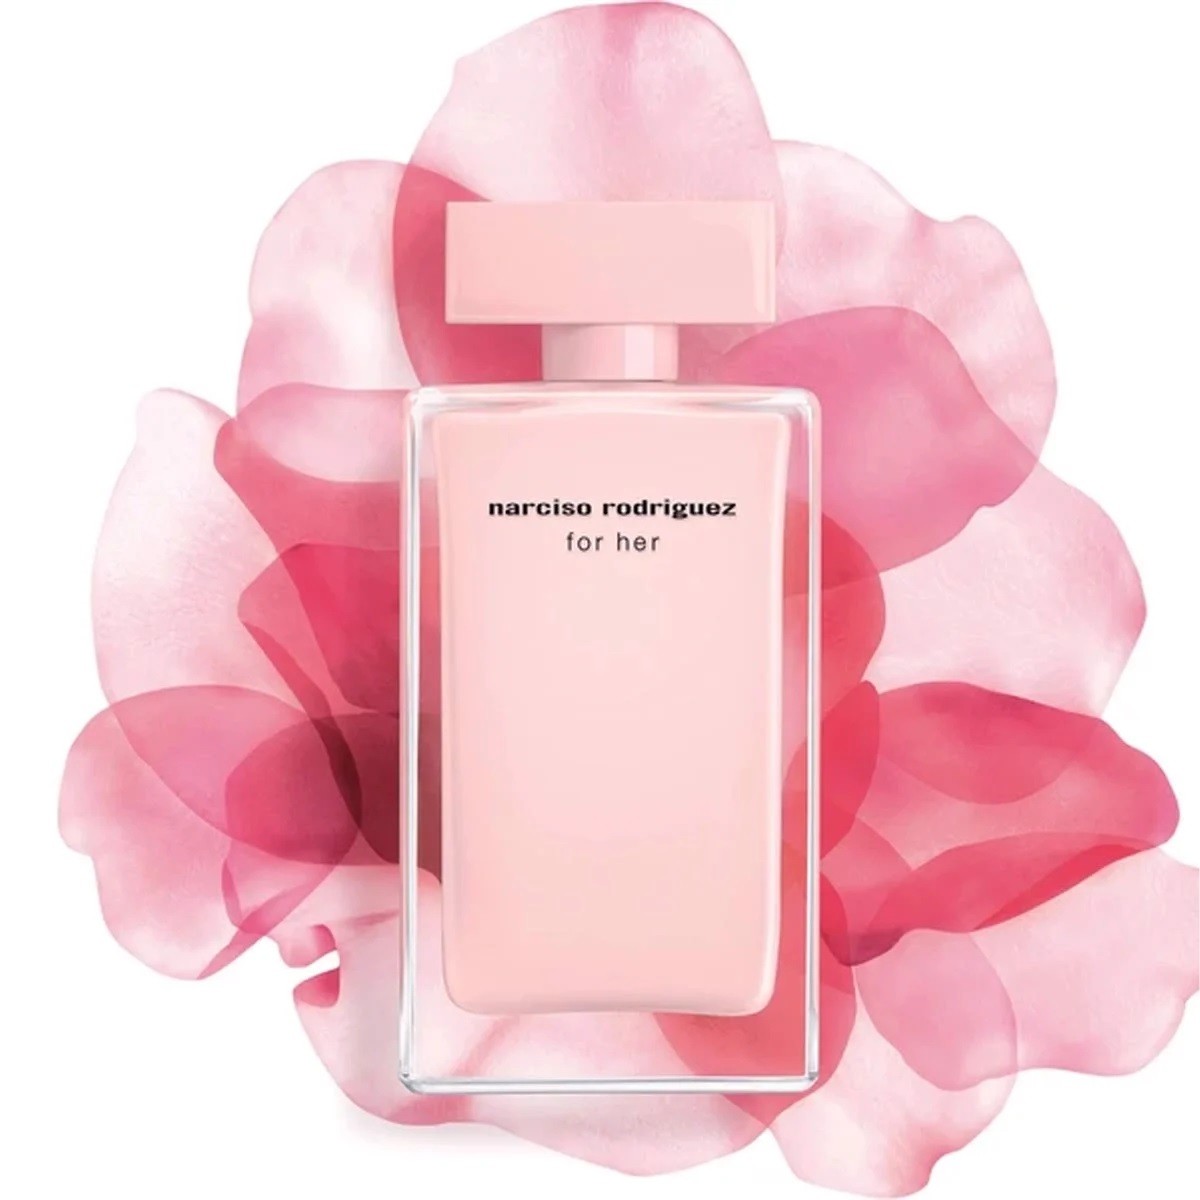 Narciso-Rodriguez-For-Her-Edp-100ml